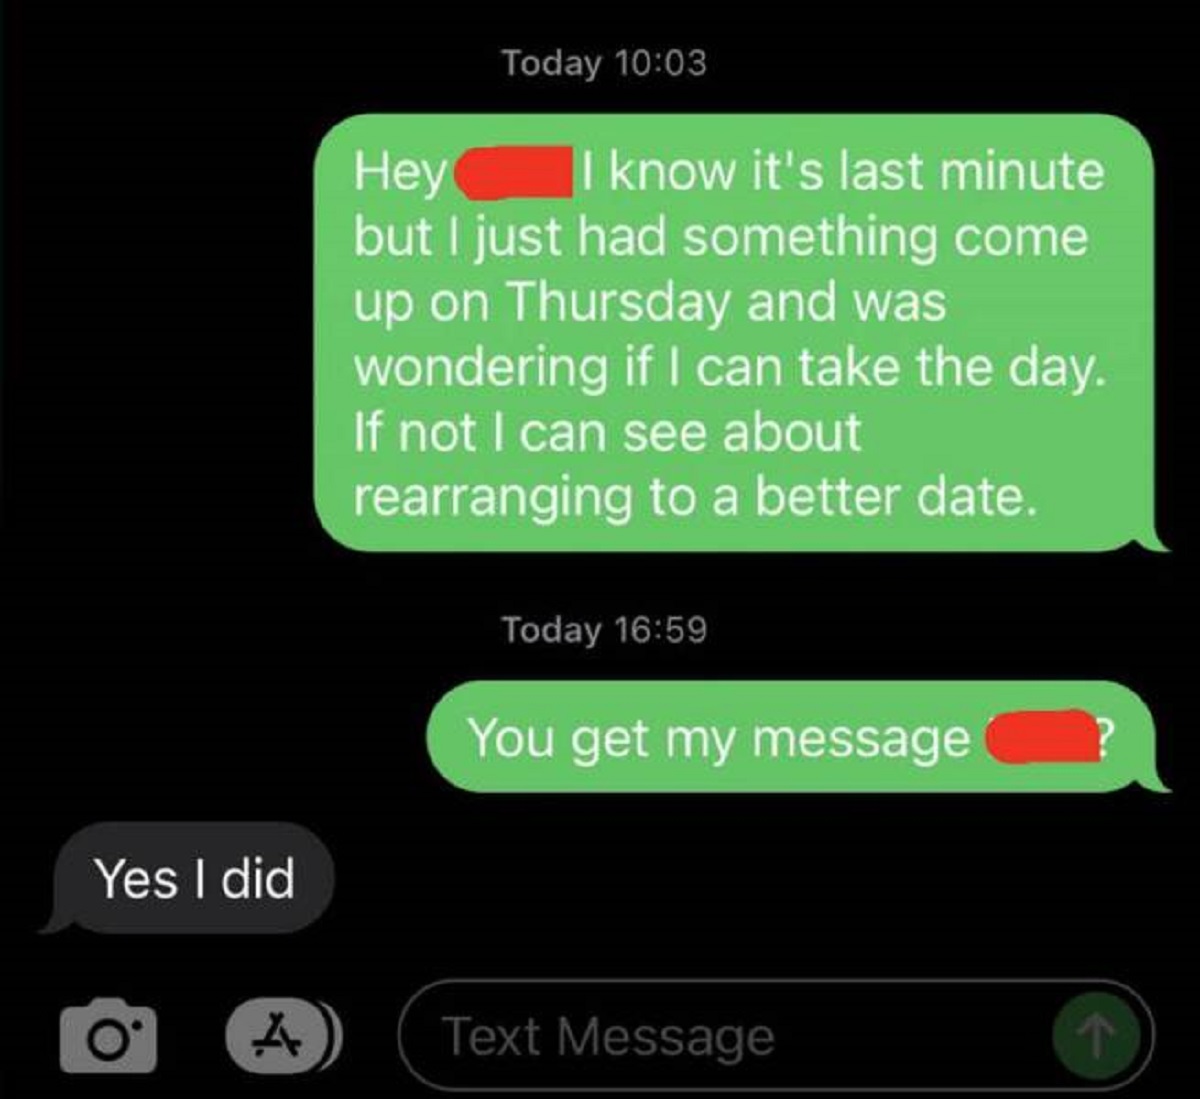 screenshot - Hey Today I know it's last minute but I just had something come up on Thursday and was wondering if I can take the day. If not I can see about rearranging to a better date. Today You get my message Yes I did A Text Message